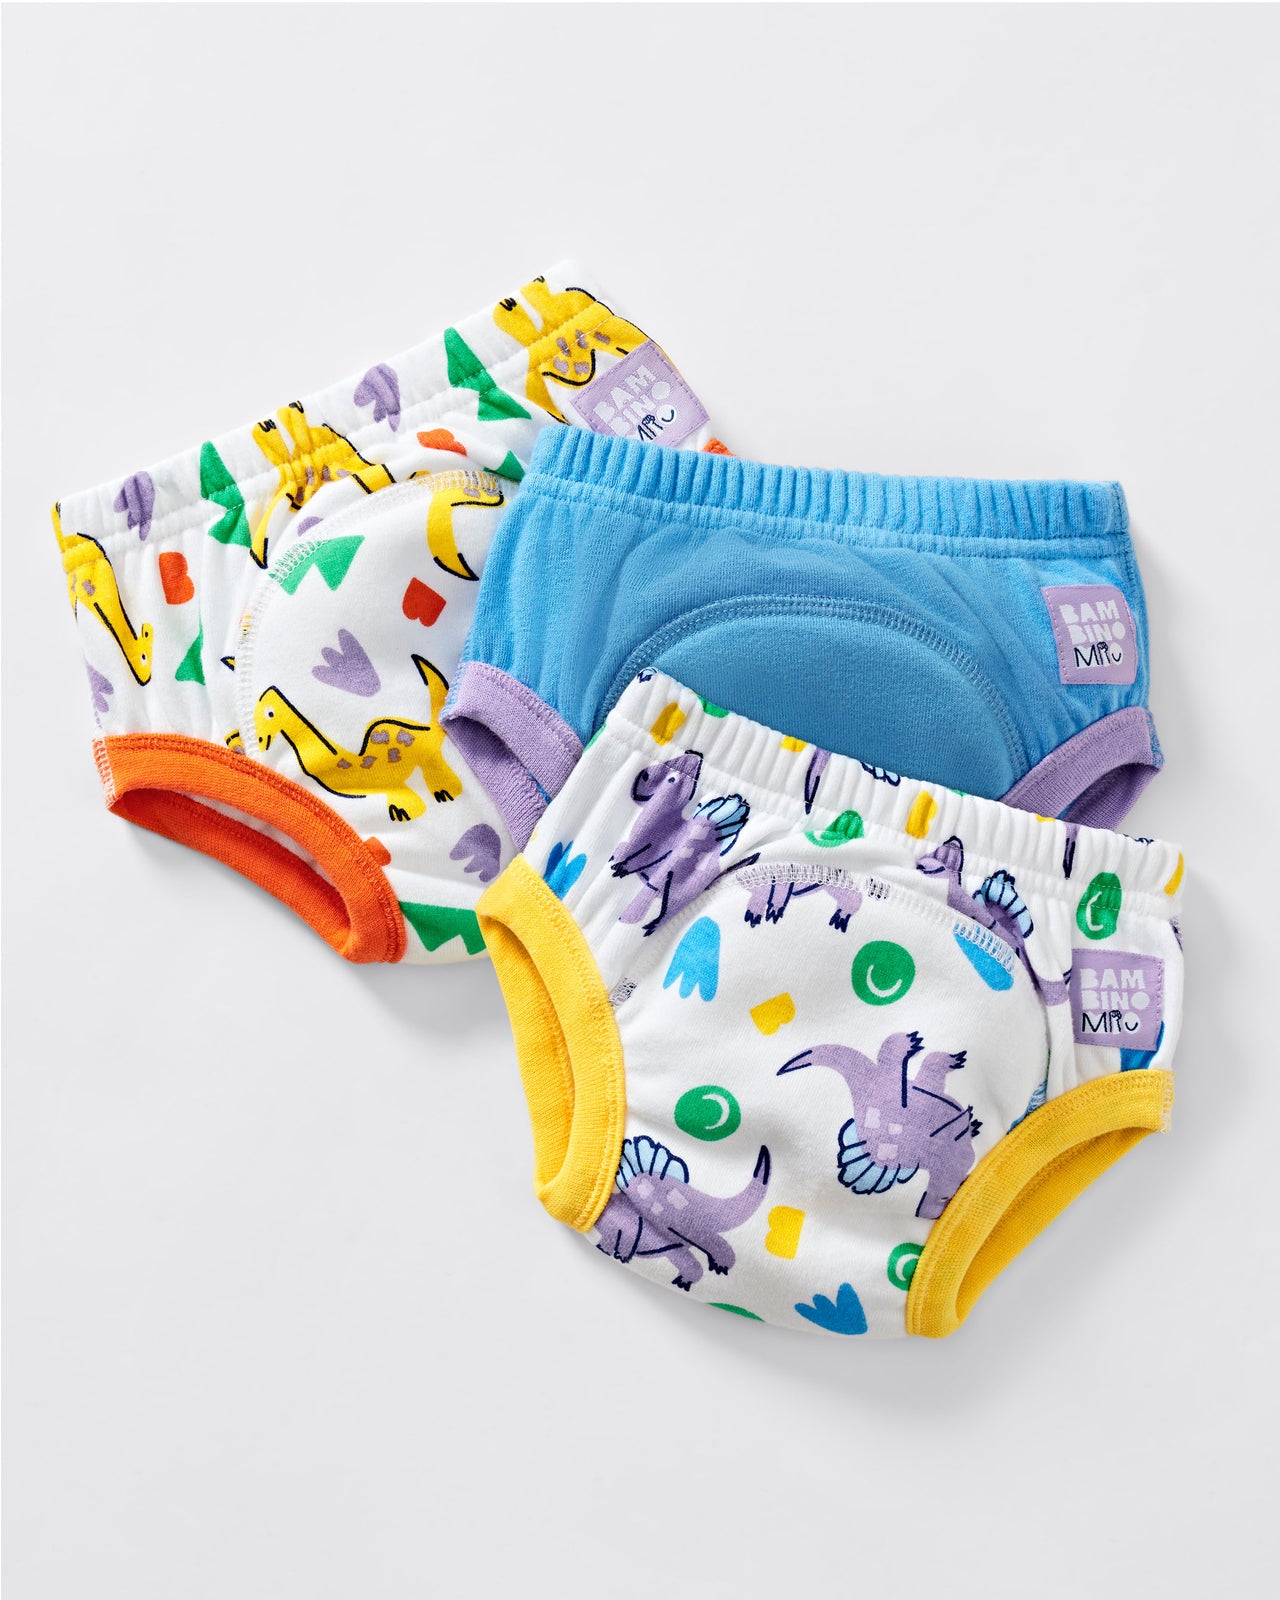 Bambino Mio Baby Potty Training Products for sale